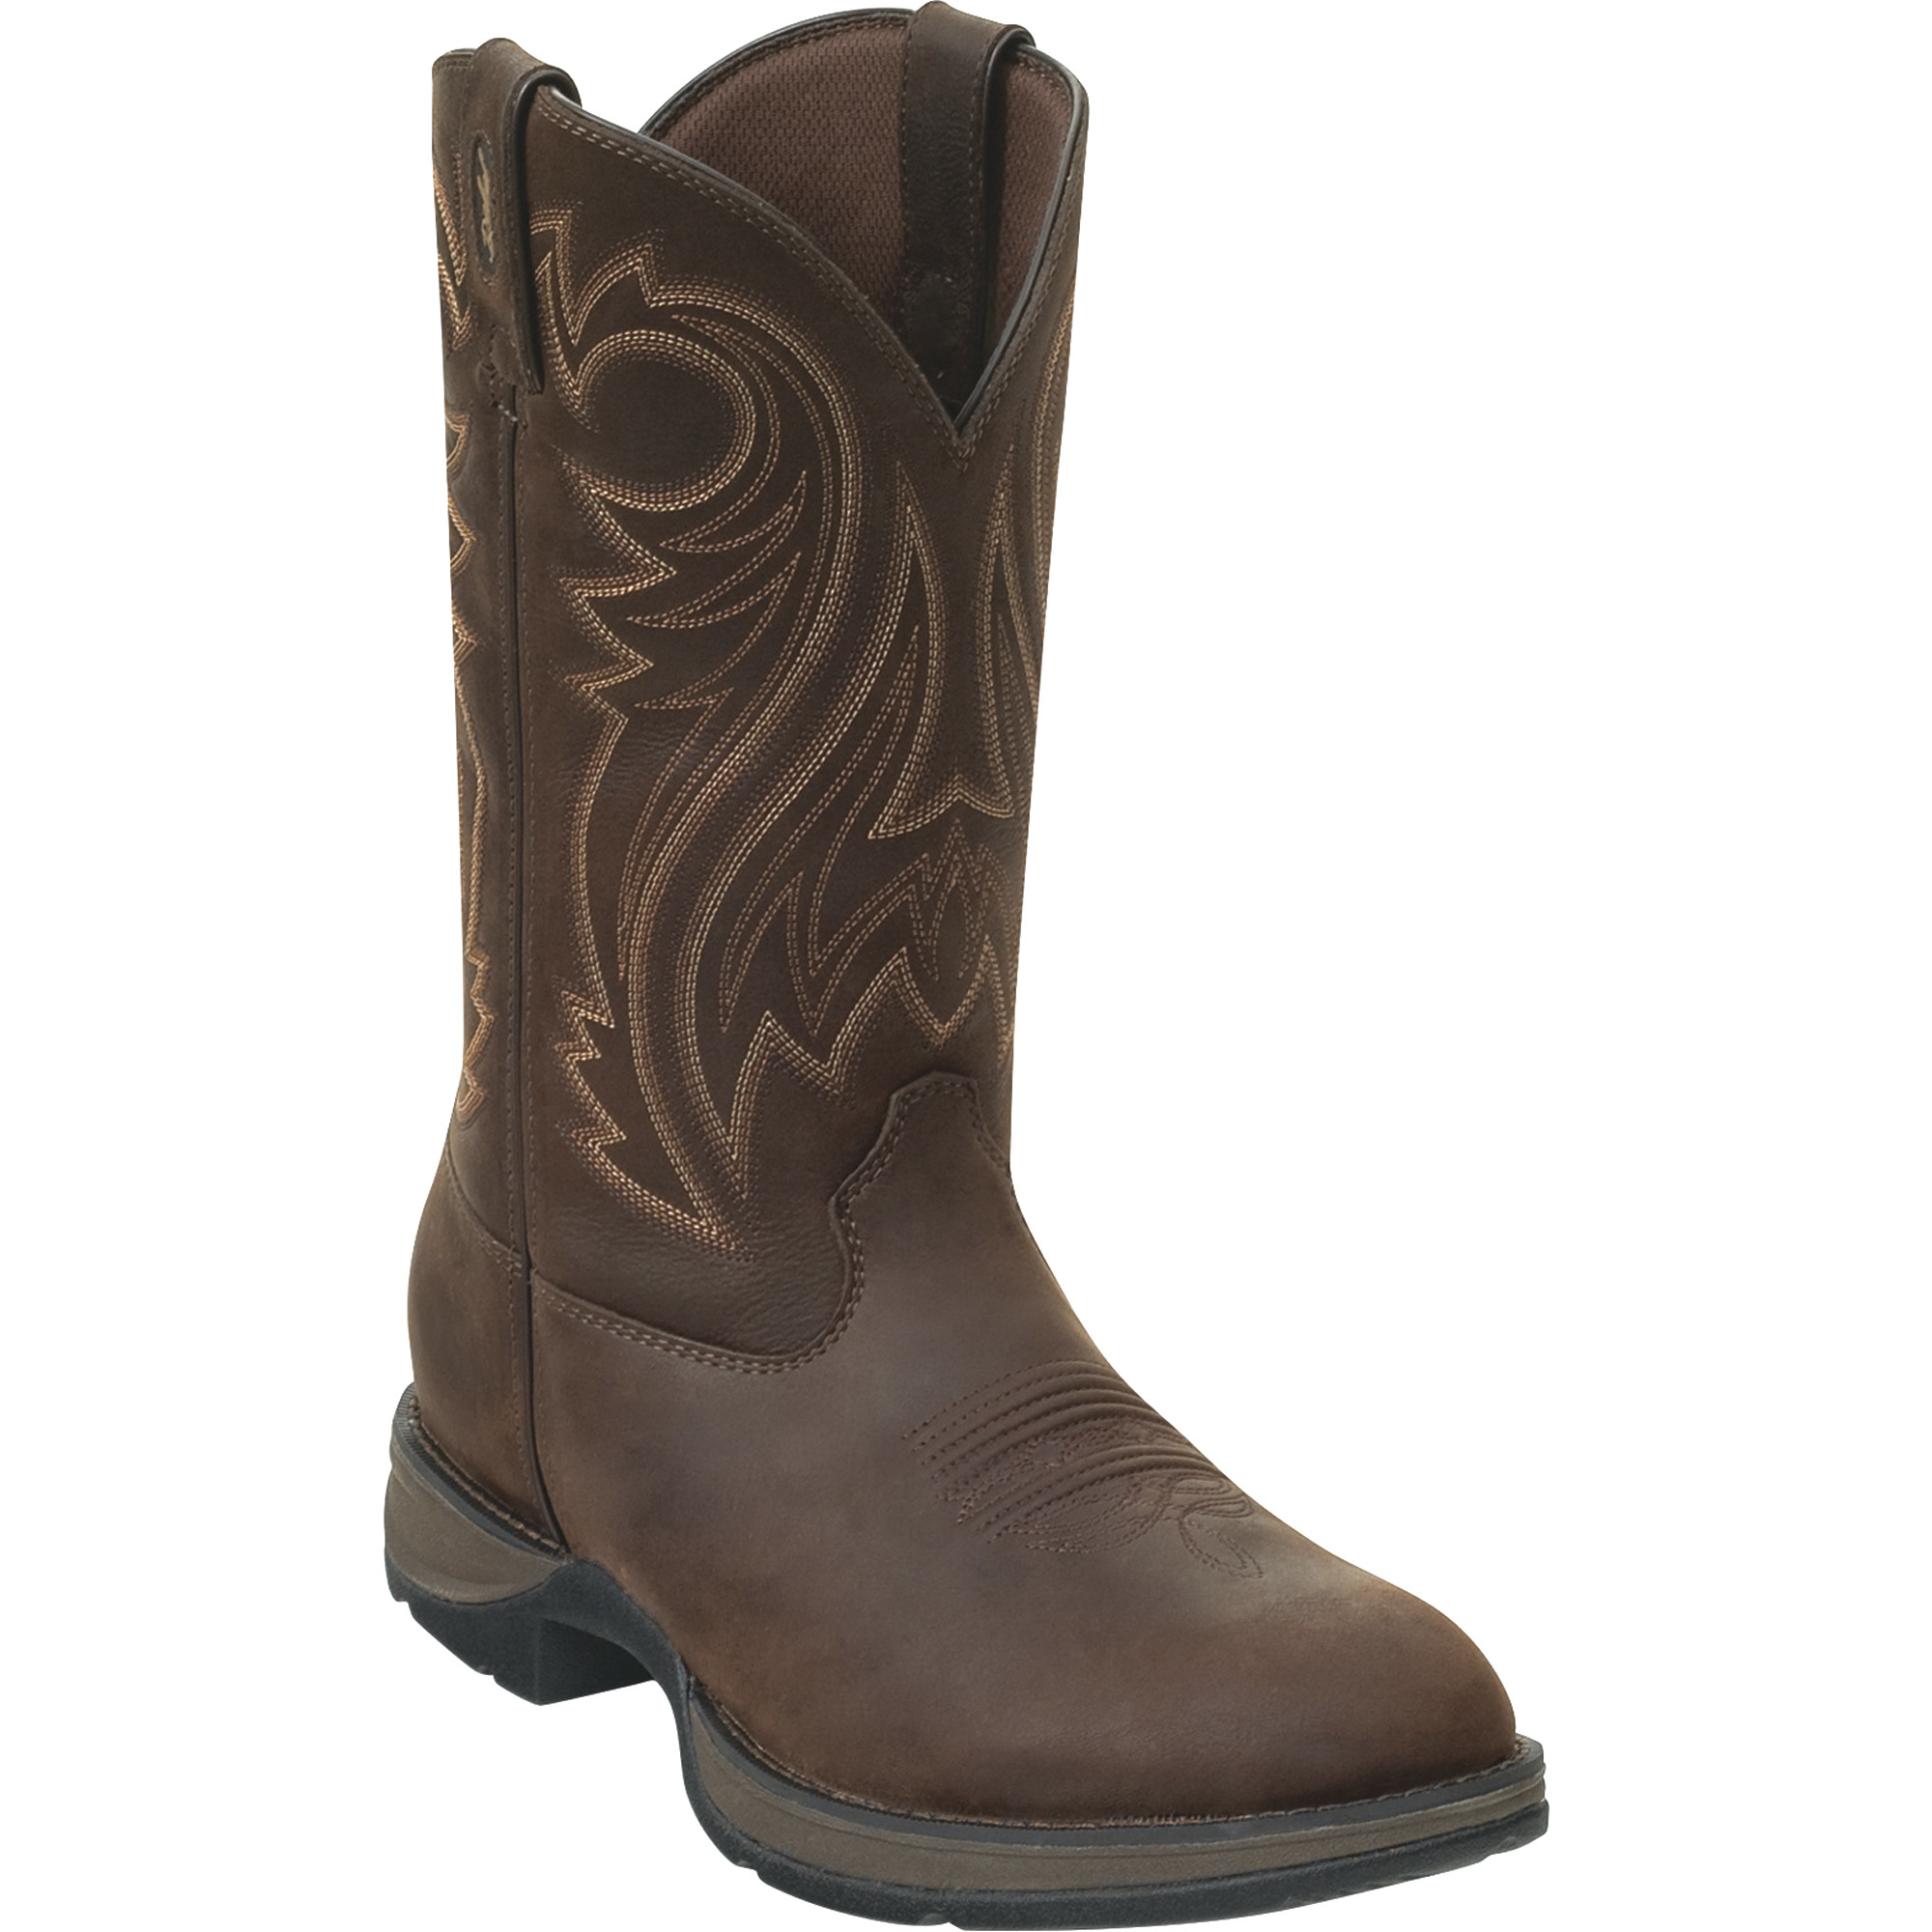 Durango Men's Rebel 12Inch Pull-On Western Work Boots - Chocolate, Size 10 1/2, Model DB 5464